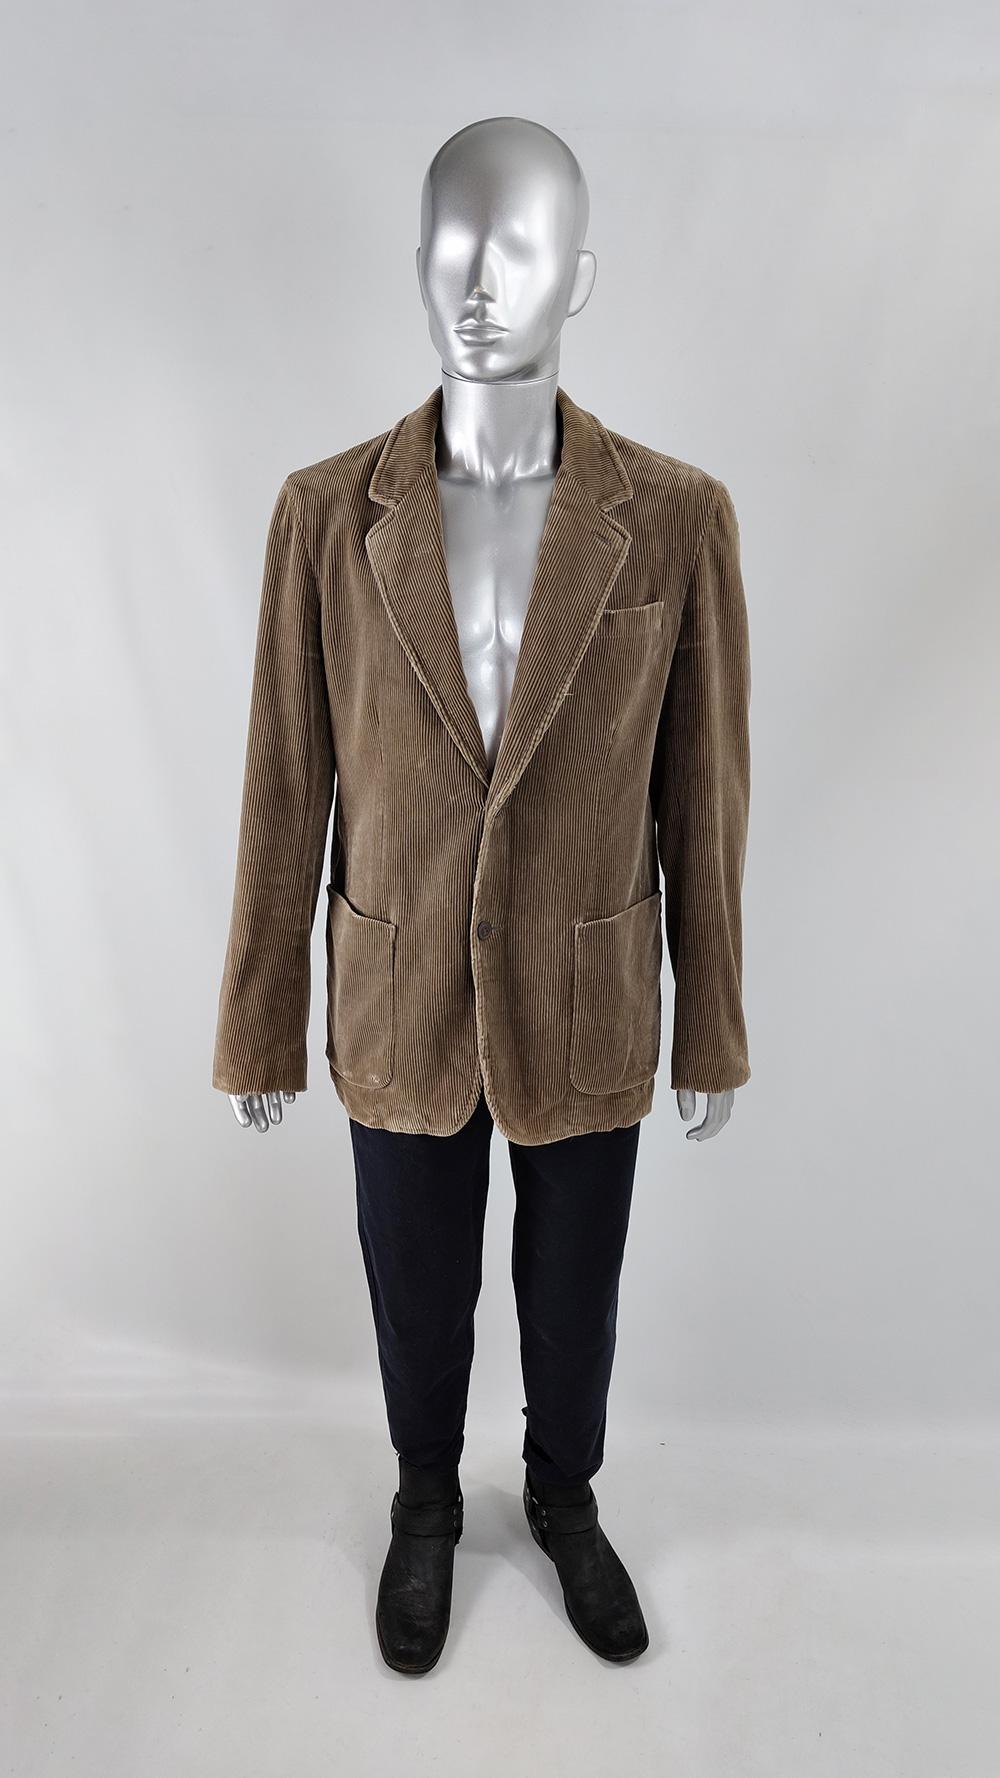 A super cool and effortless mens vintage blazer jacket from the 90s by quality Italian fashion label, Replay for their mainline label. In a brown corduroy fabric, this has a nonchalant unstructured design. The irreverent charm of this jacket is